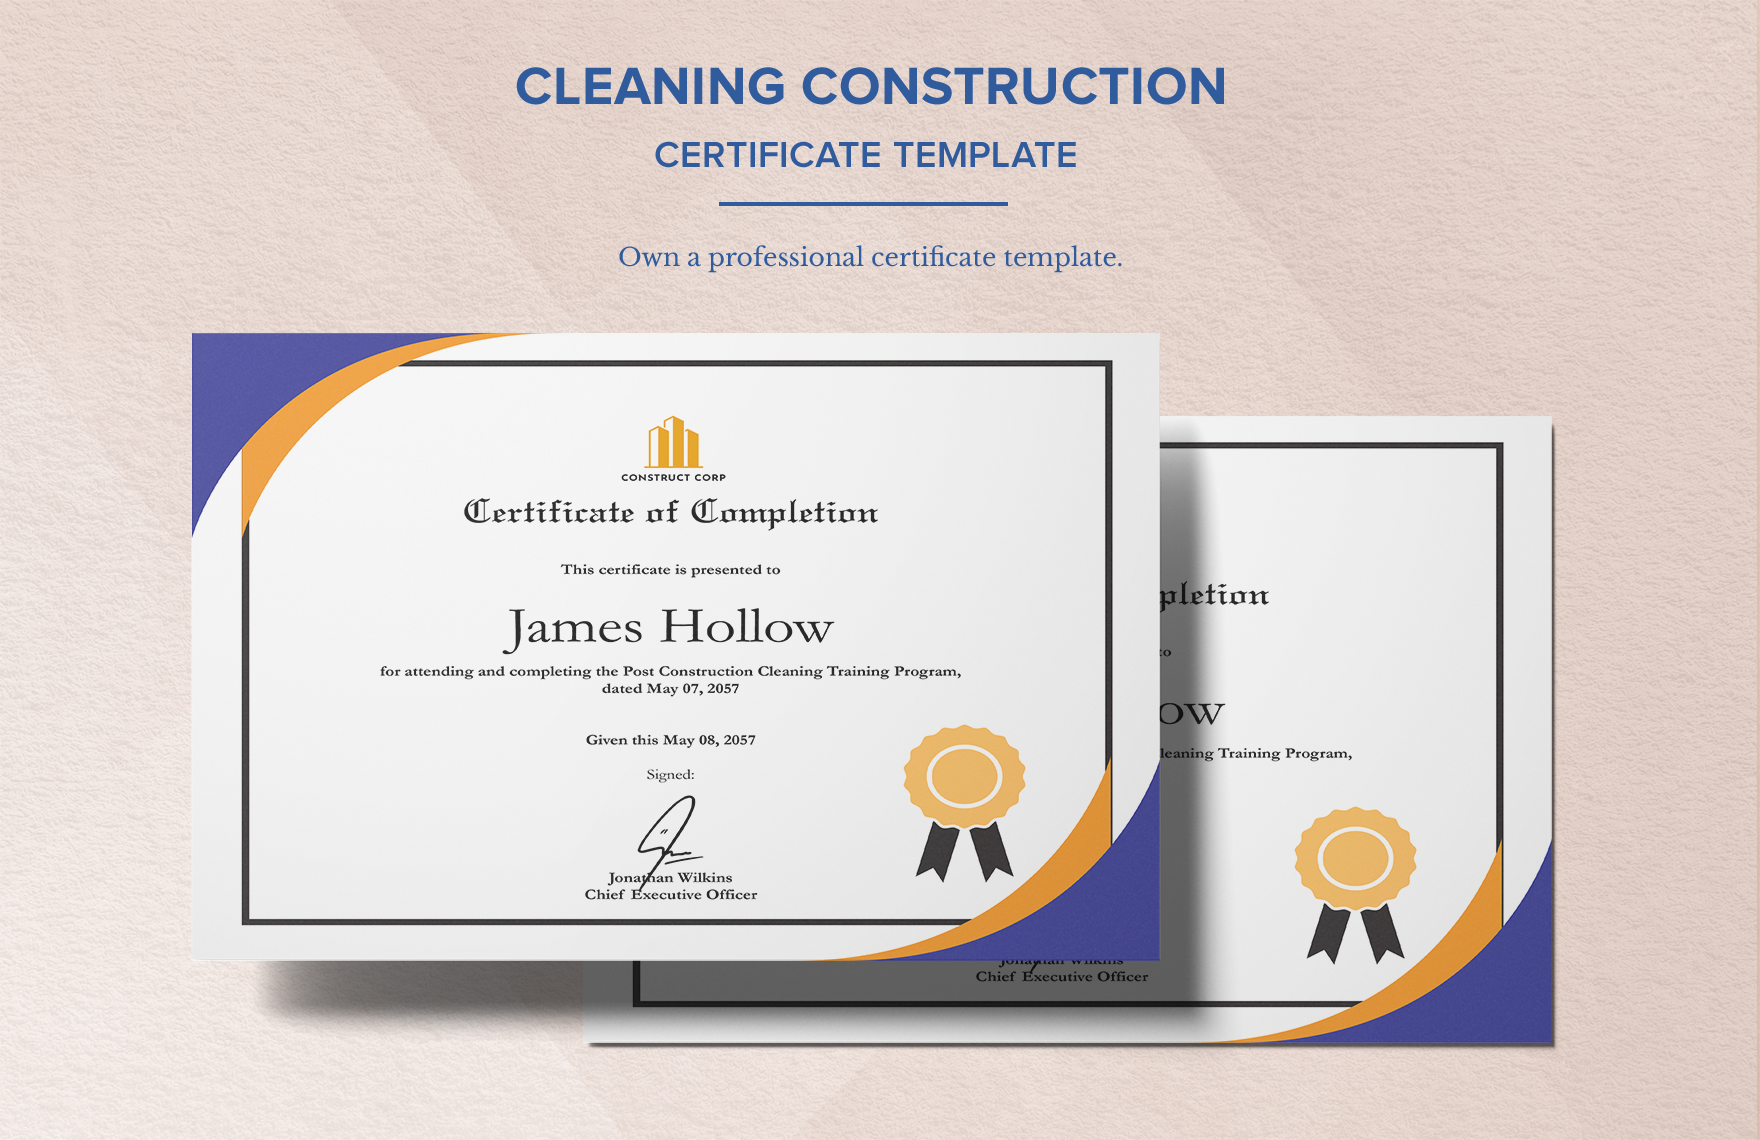 Cleaning Construction Certificate Template